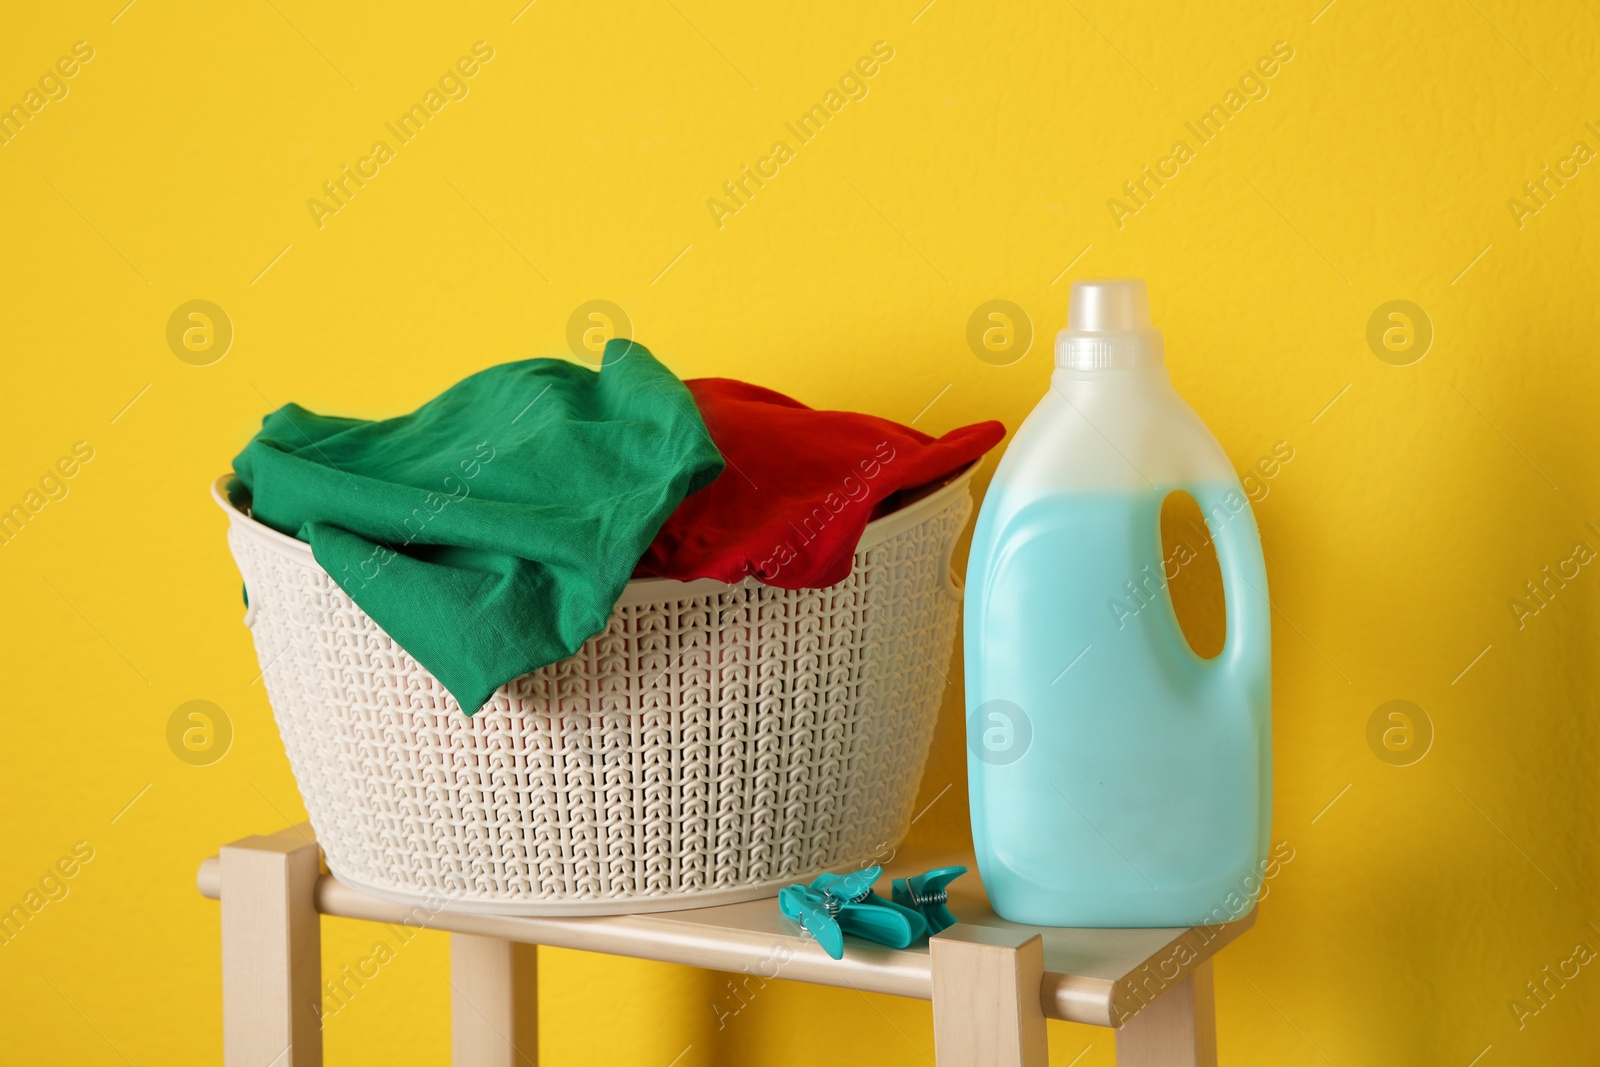 Photo of Laundry basket with dirty clothes and detergent on wooden stool against yellow background